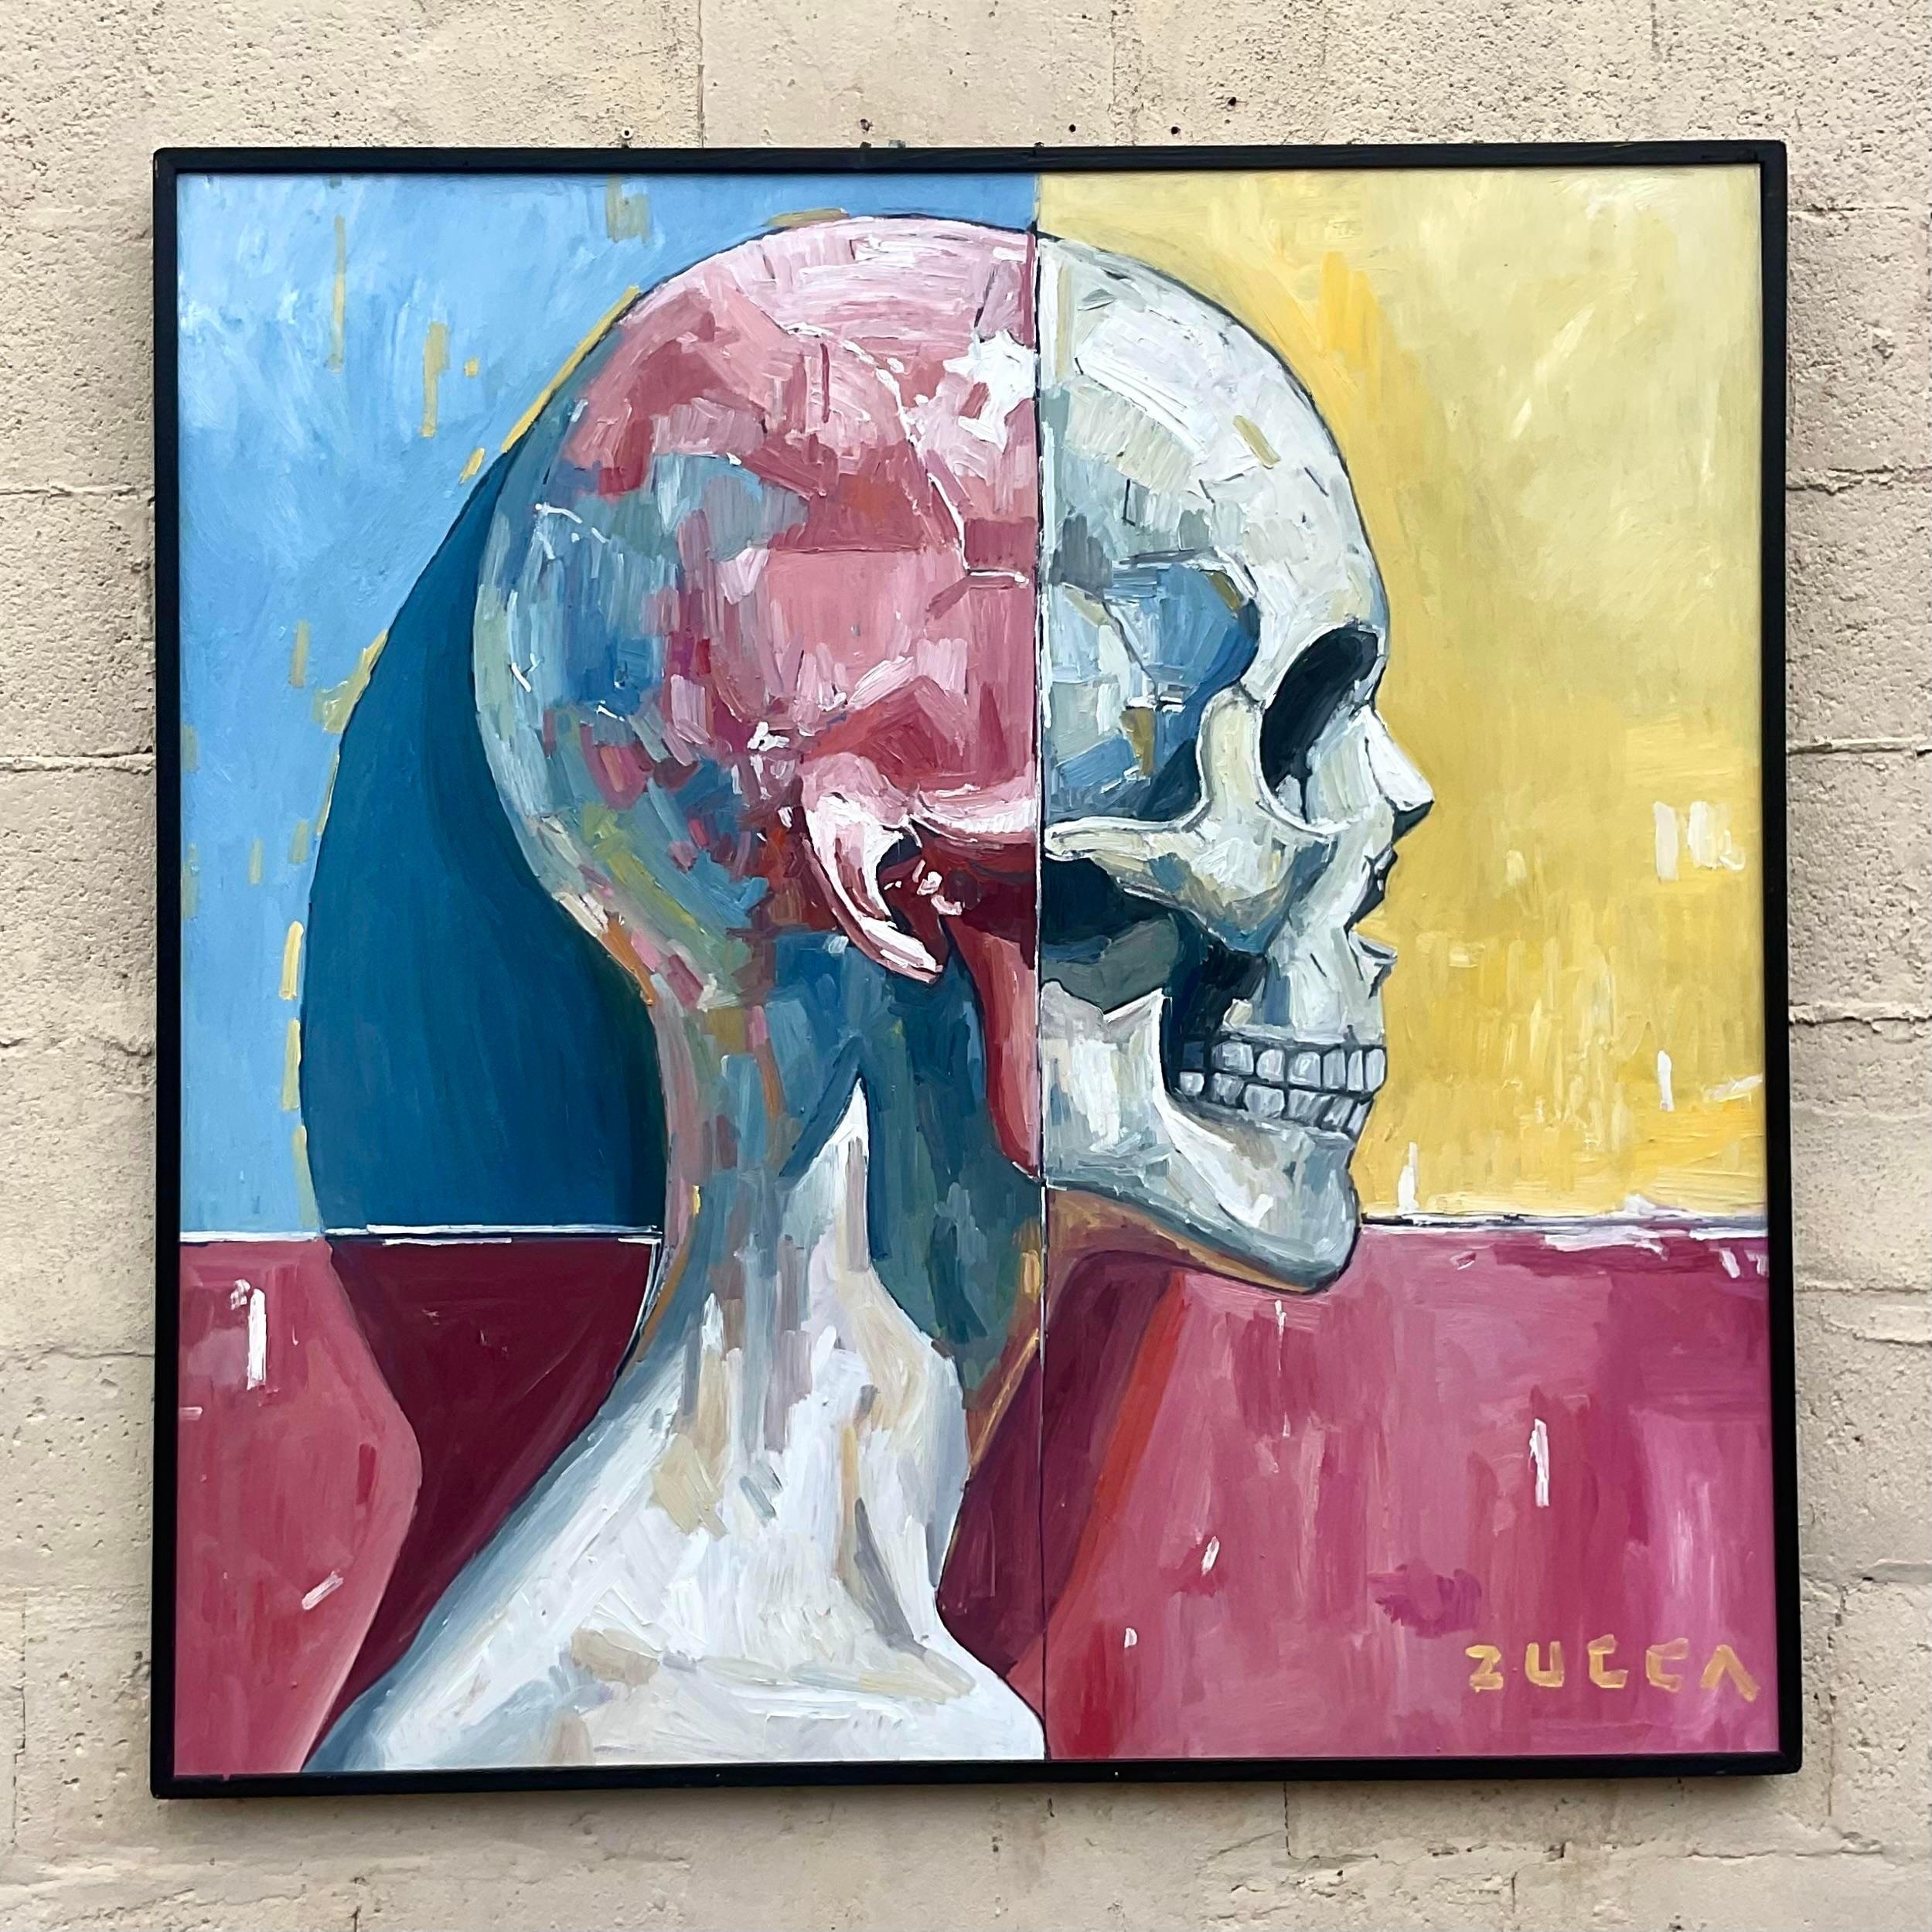 Channeling the eclectic spirit of American bohemia, this Vintage Boho Original Skull Oil Painting On Board captivates with its bold imagery and vibrant colors. A striking blend of artistic expression and cultural symbolism, this piece adds a touch